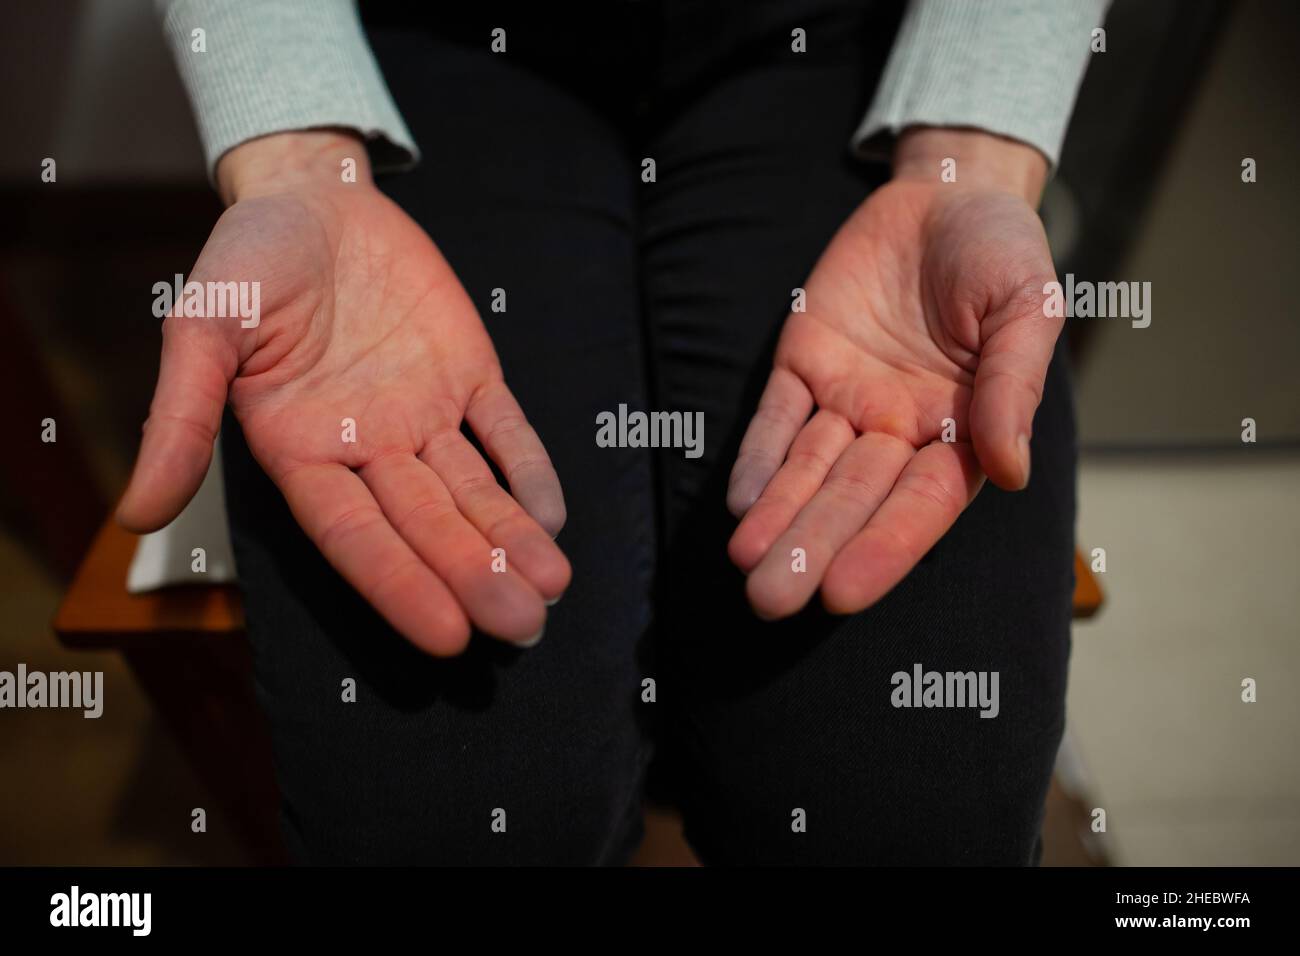 Hands of person with Raynaud's phenomenon during attack with some fingers turned blue after white, color change Raynaud’s syndrome Raynaud disease Stock Photo